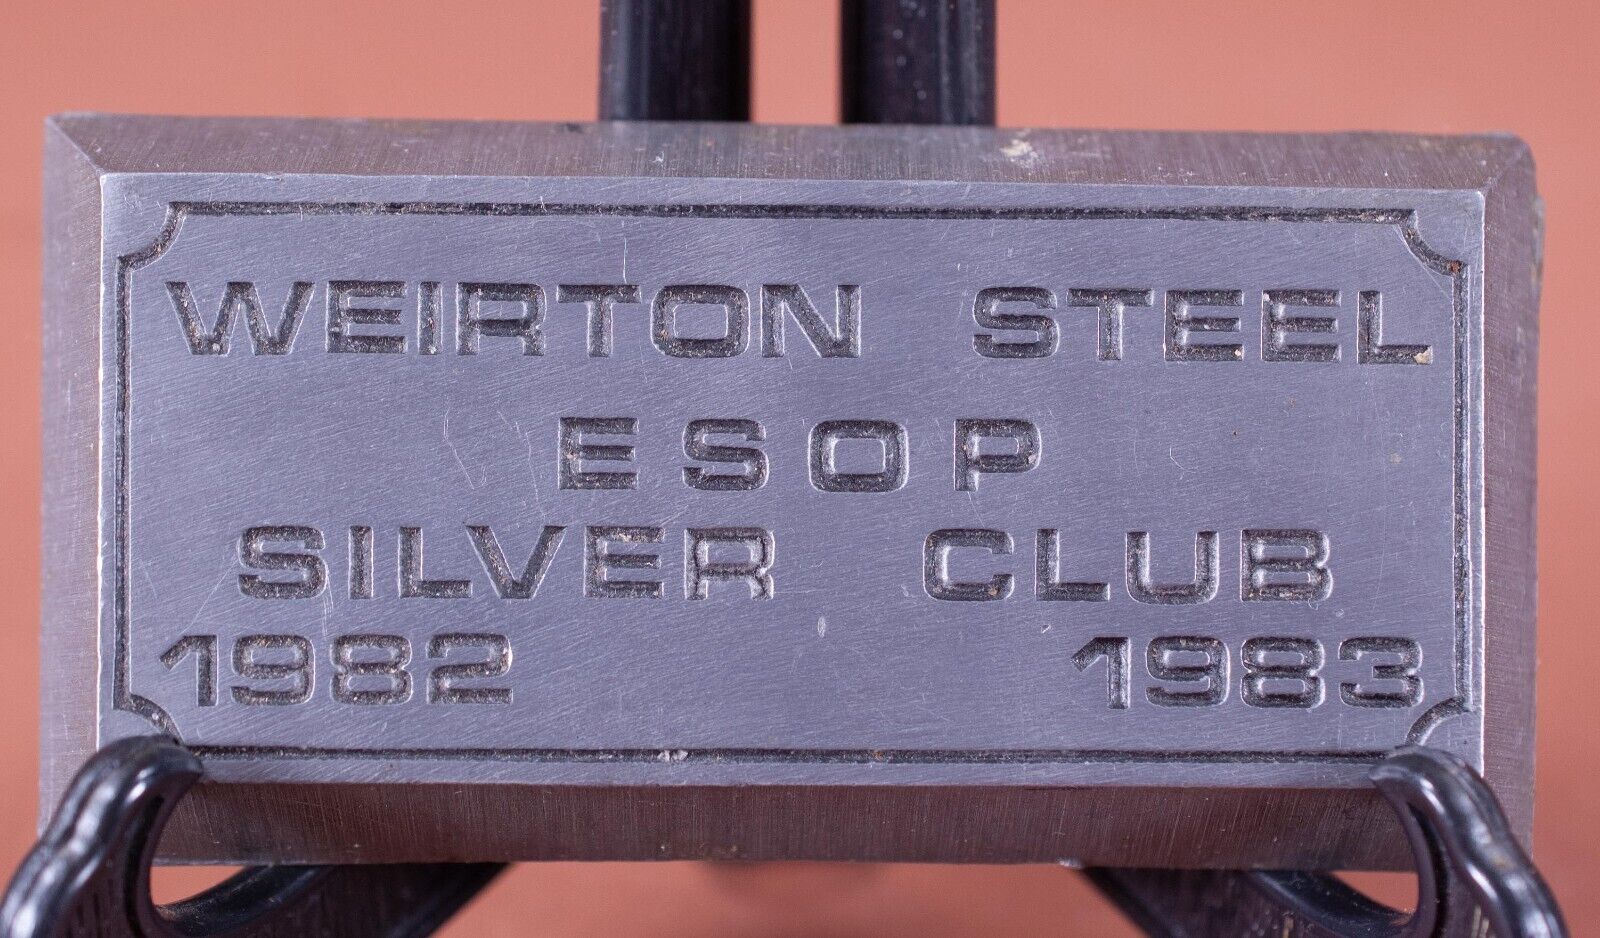 Weirton Steel Company Silver Club ESOP 1983 Paperweight Ignot